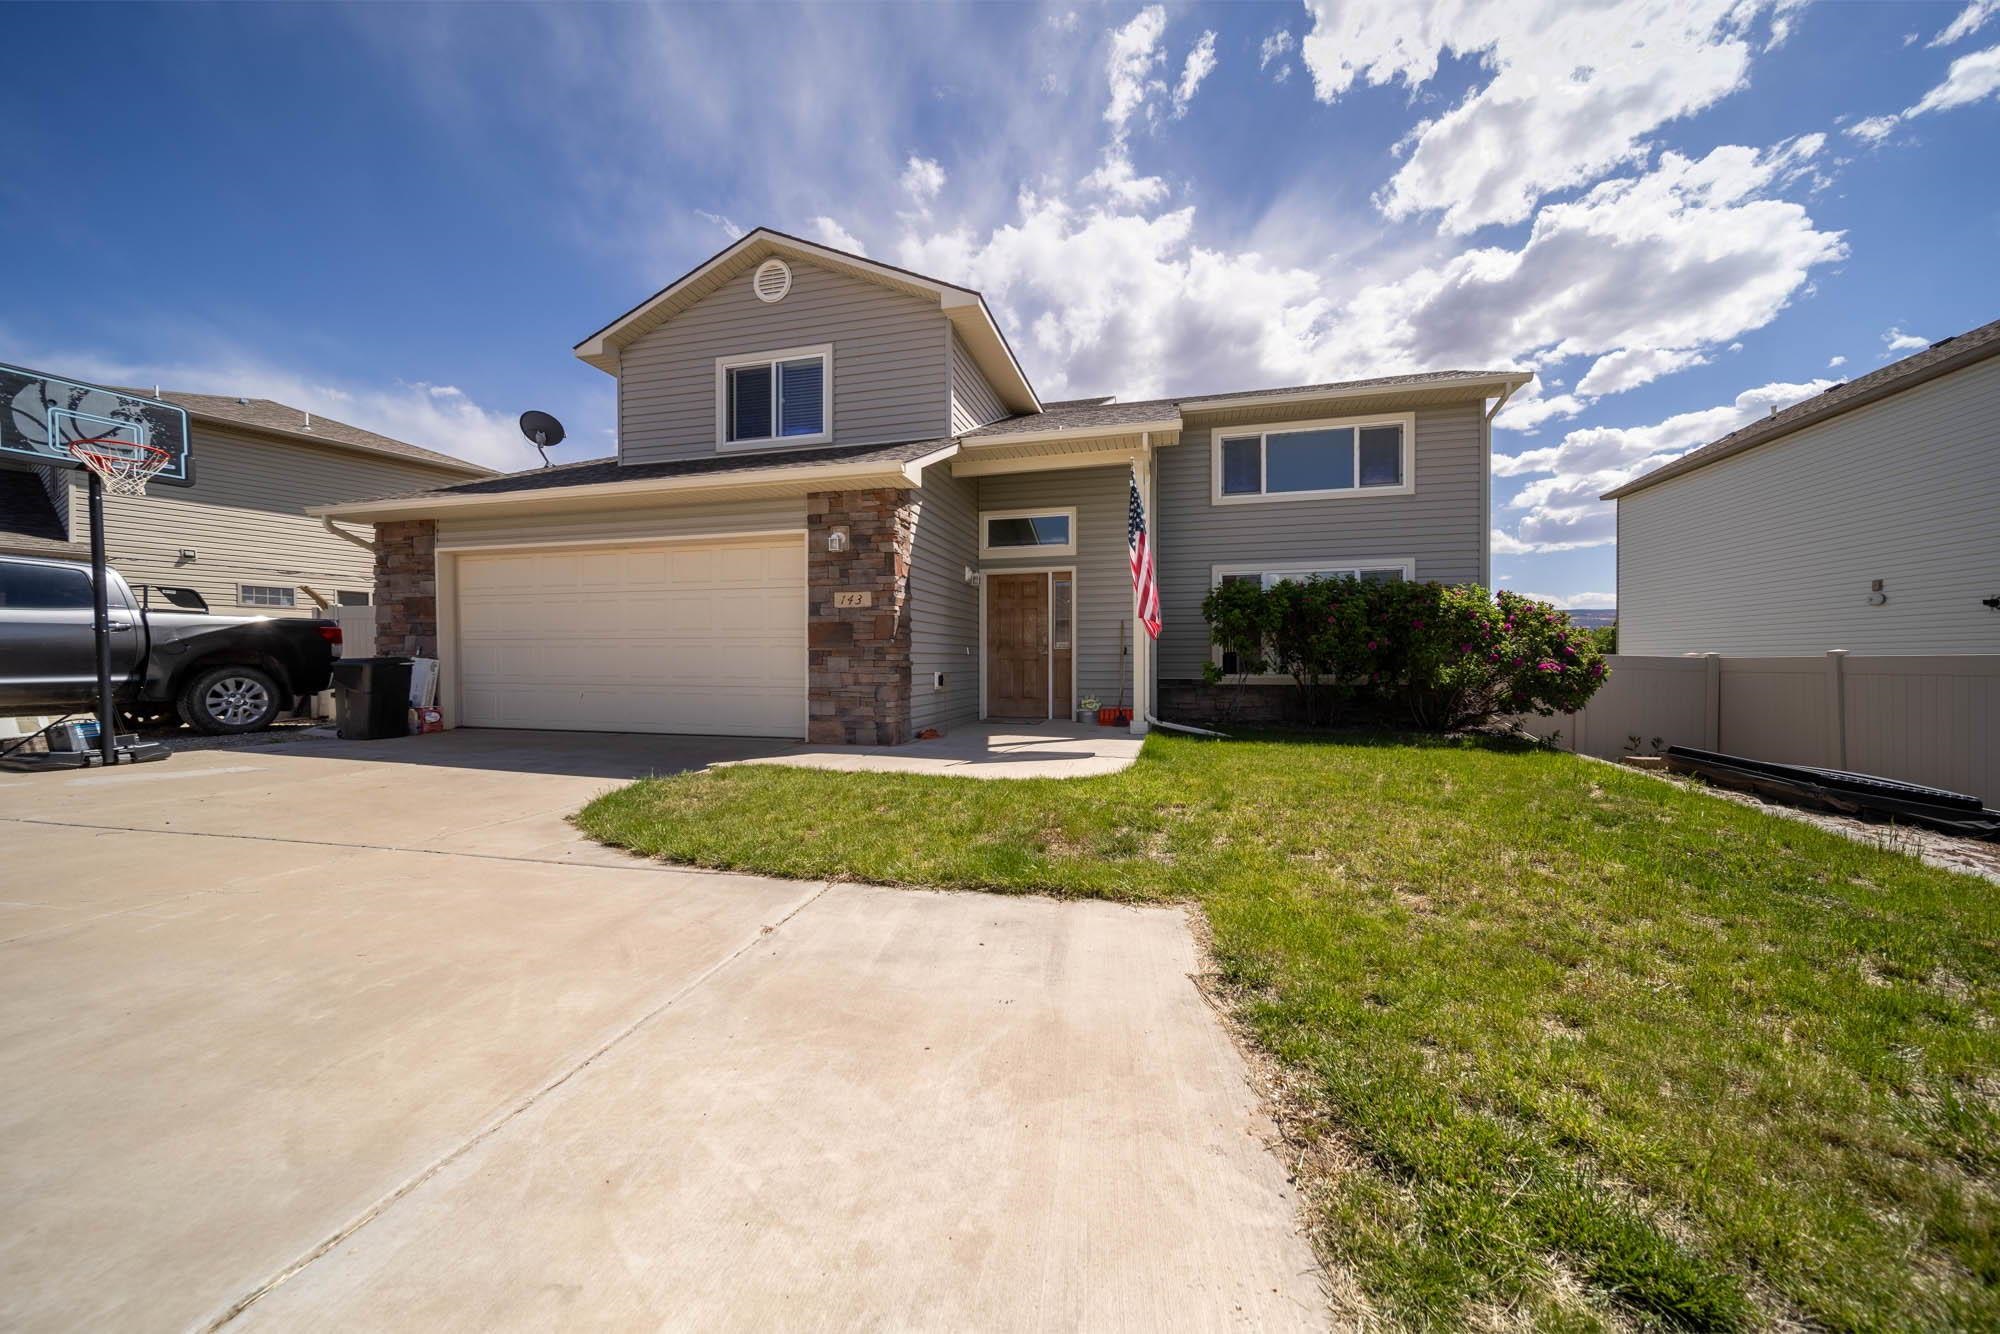 Fruita- check! 4 bedrooms, 3 bathrooms- check! Just under 1/4 acre lot- check! RV parking- check!  Almost 1900 feet- check! Large, fully fenced backyard- check! Open concept living space- check!  Primary bedroom on main floor- check!  If this is your checklist- we've got your home! Nestled back in a cul-de-sac on one of the largest lots in the subdivision, a little extra room isn't an issue with this one! Soaring ceilings in living room with plenty of natural light. Kitchen has breakfast nook and countertop seating. Maple cabinets and all appliances stay. All bedrooms are generously sized.  Current owner is ready to turn the page to a new chapter in life, giving you the opportunity to start yours!